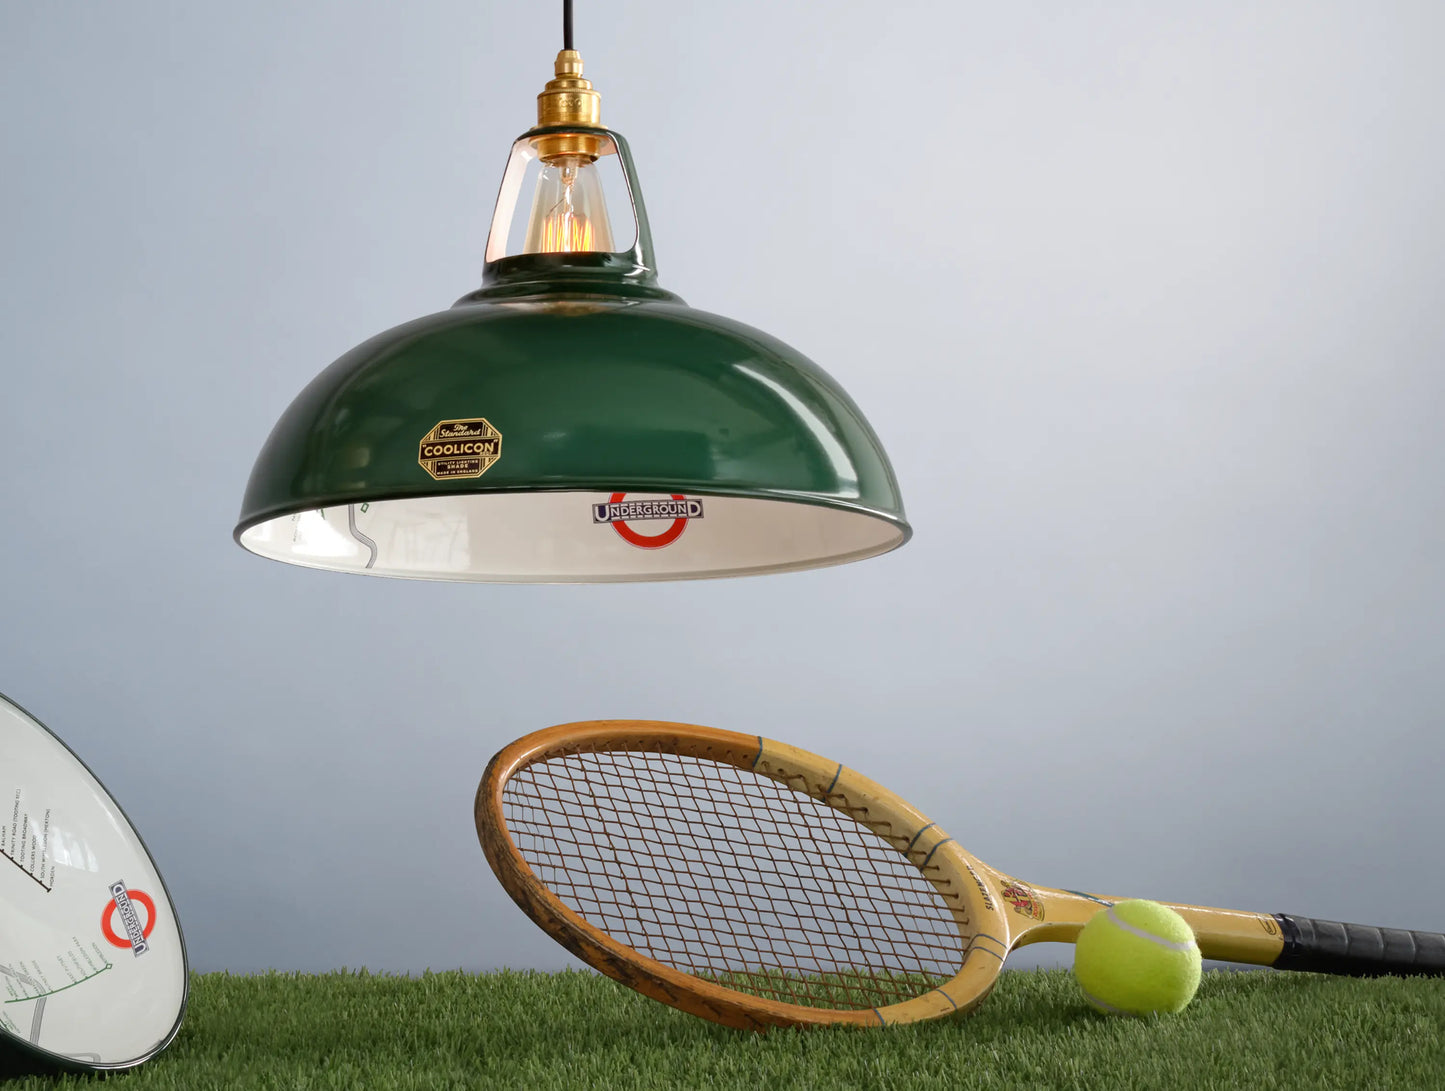 A Large District Line Green shade above a patch of grass. Below it is a wooden tennis racket and a tennis ball